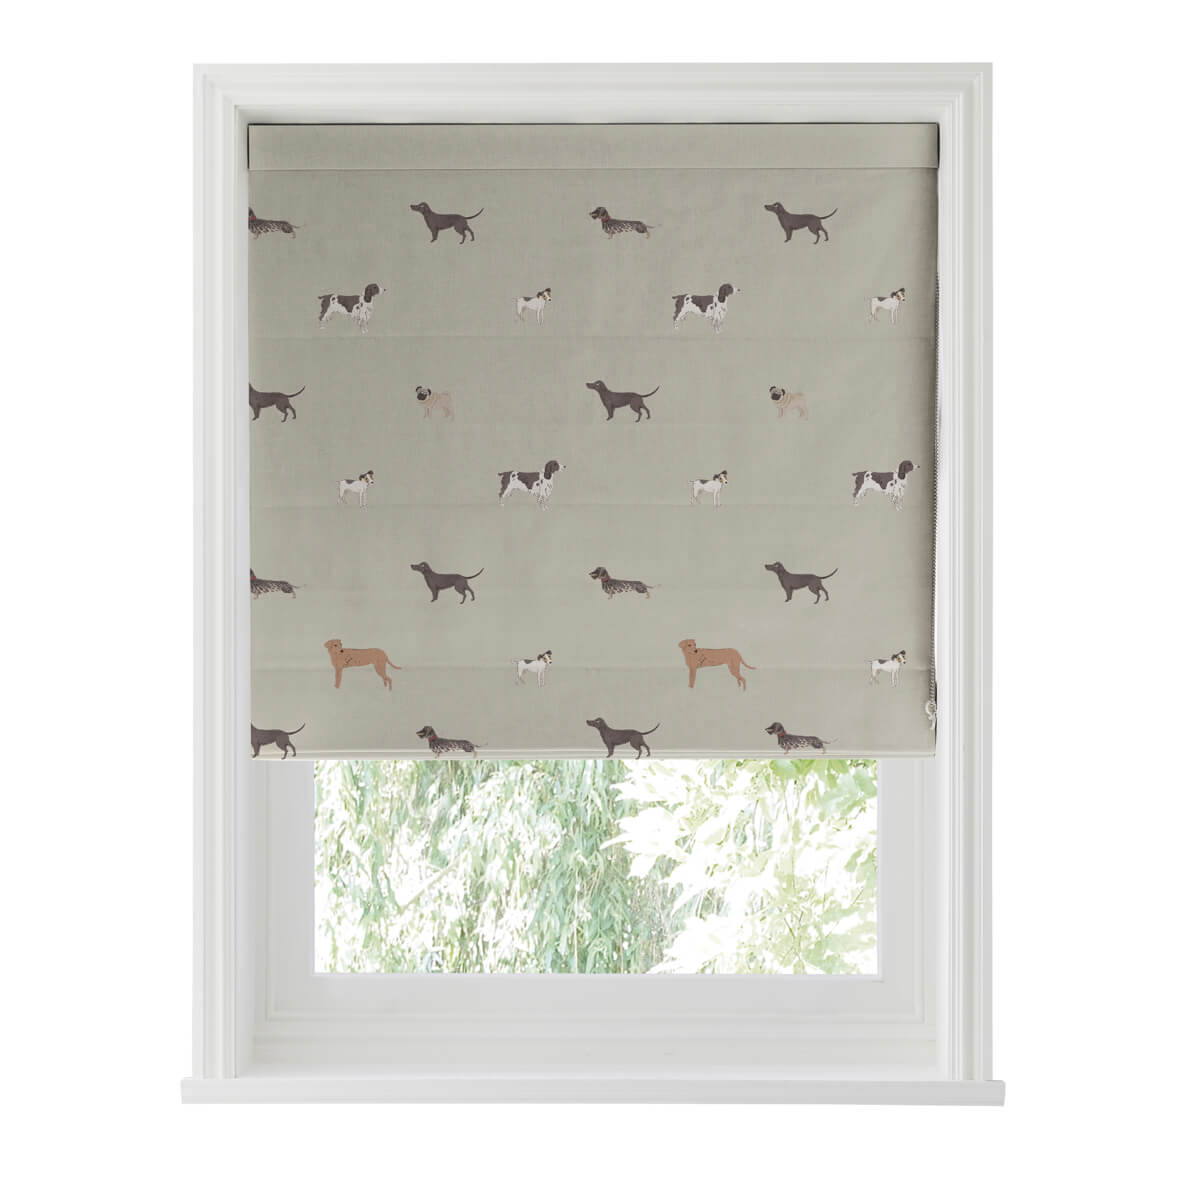 Woof Linen Made to Measure Roman Blind